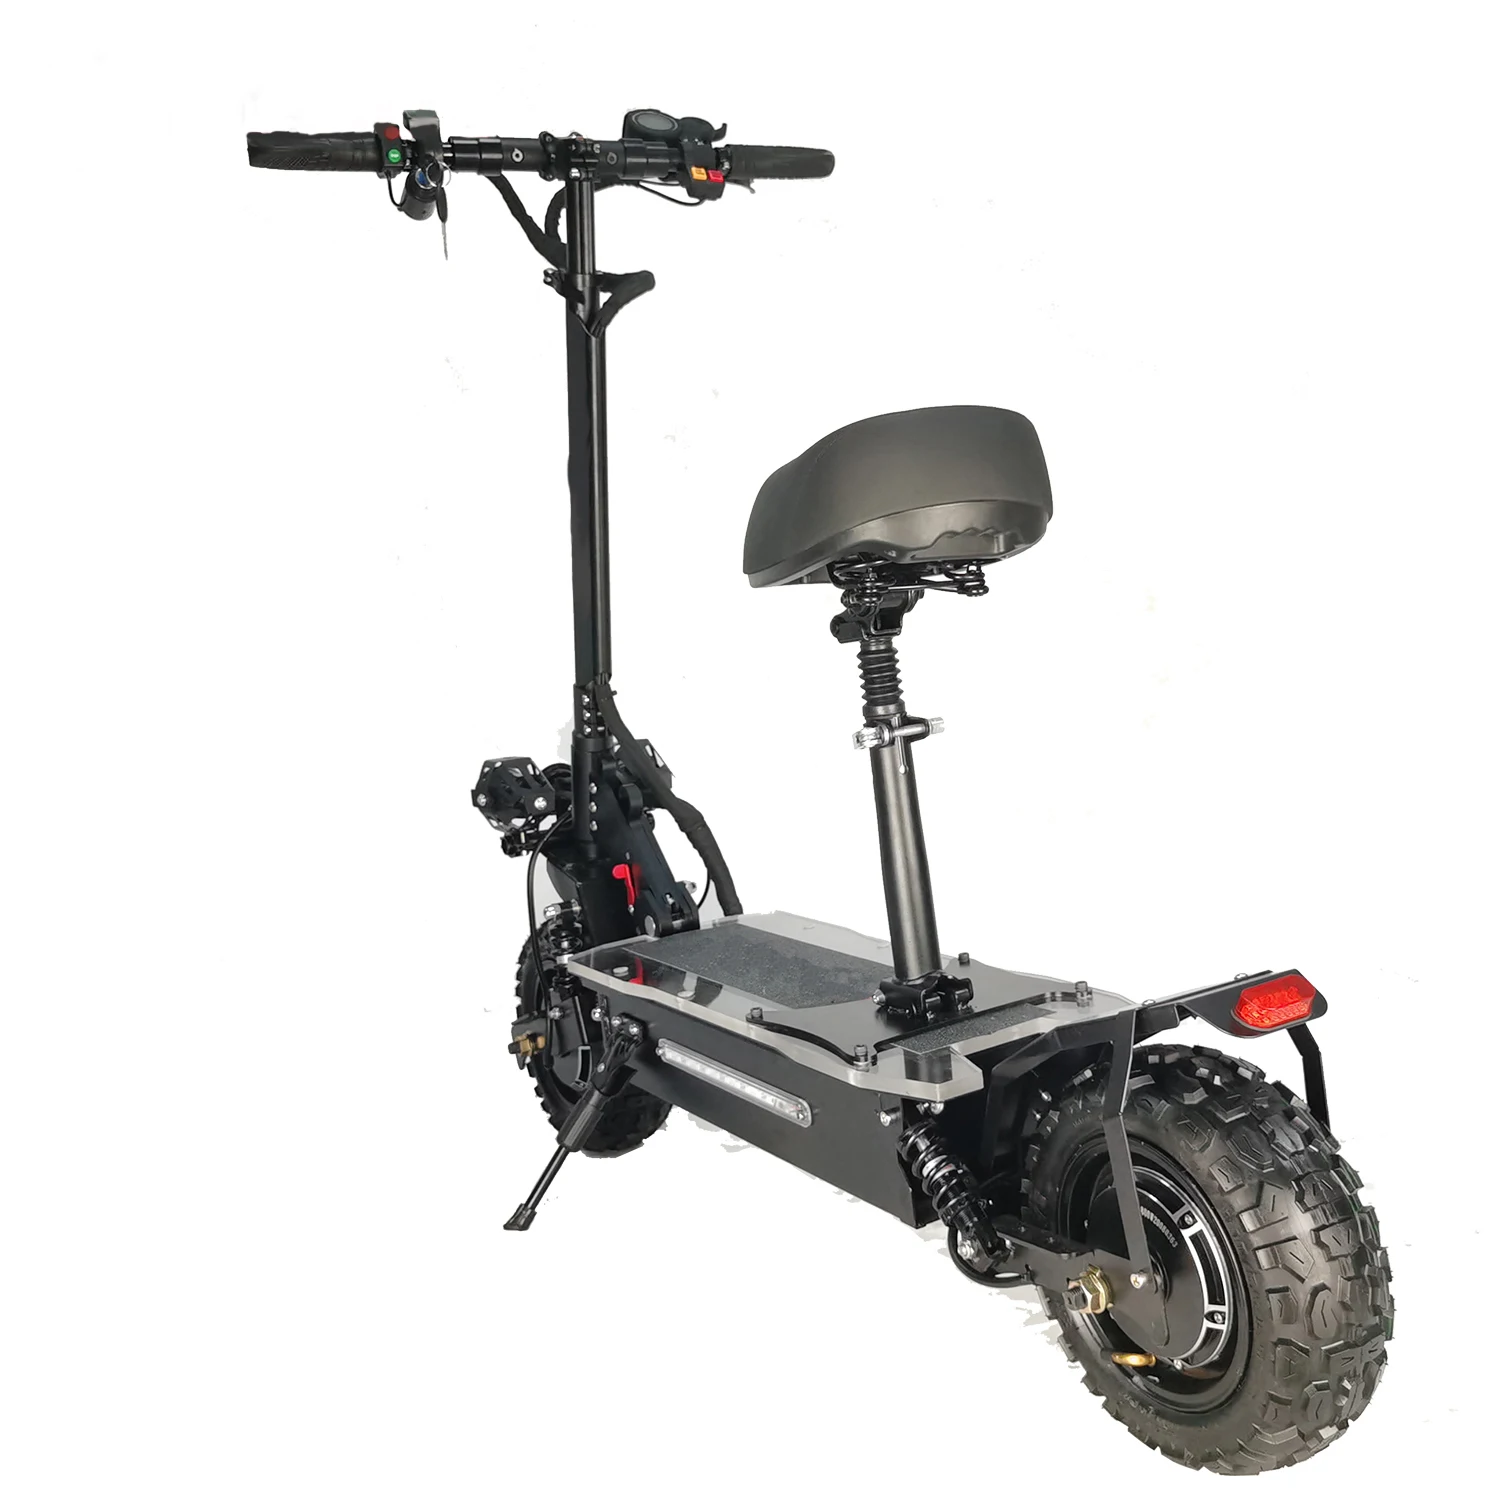 Free shipping eu uk usa warehouse range 80-100km powerful electric scooter manufacturers for adult